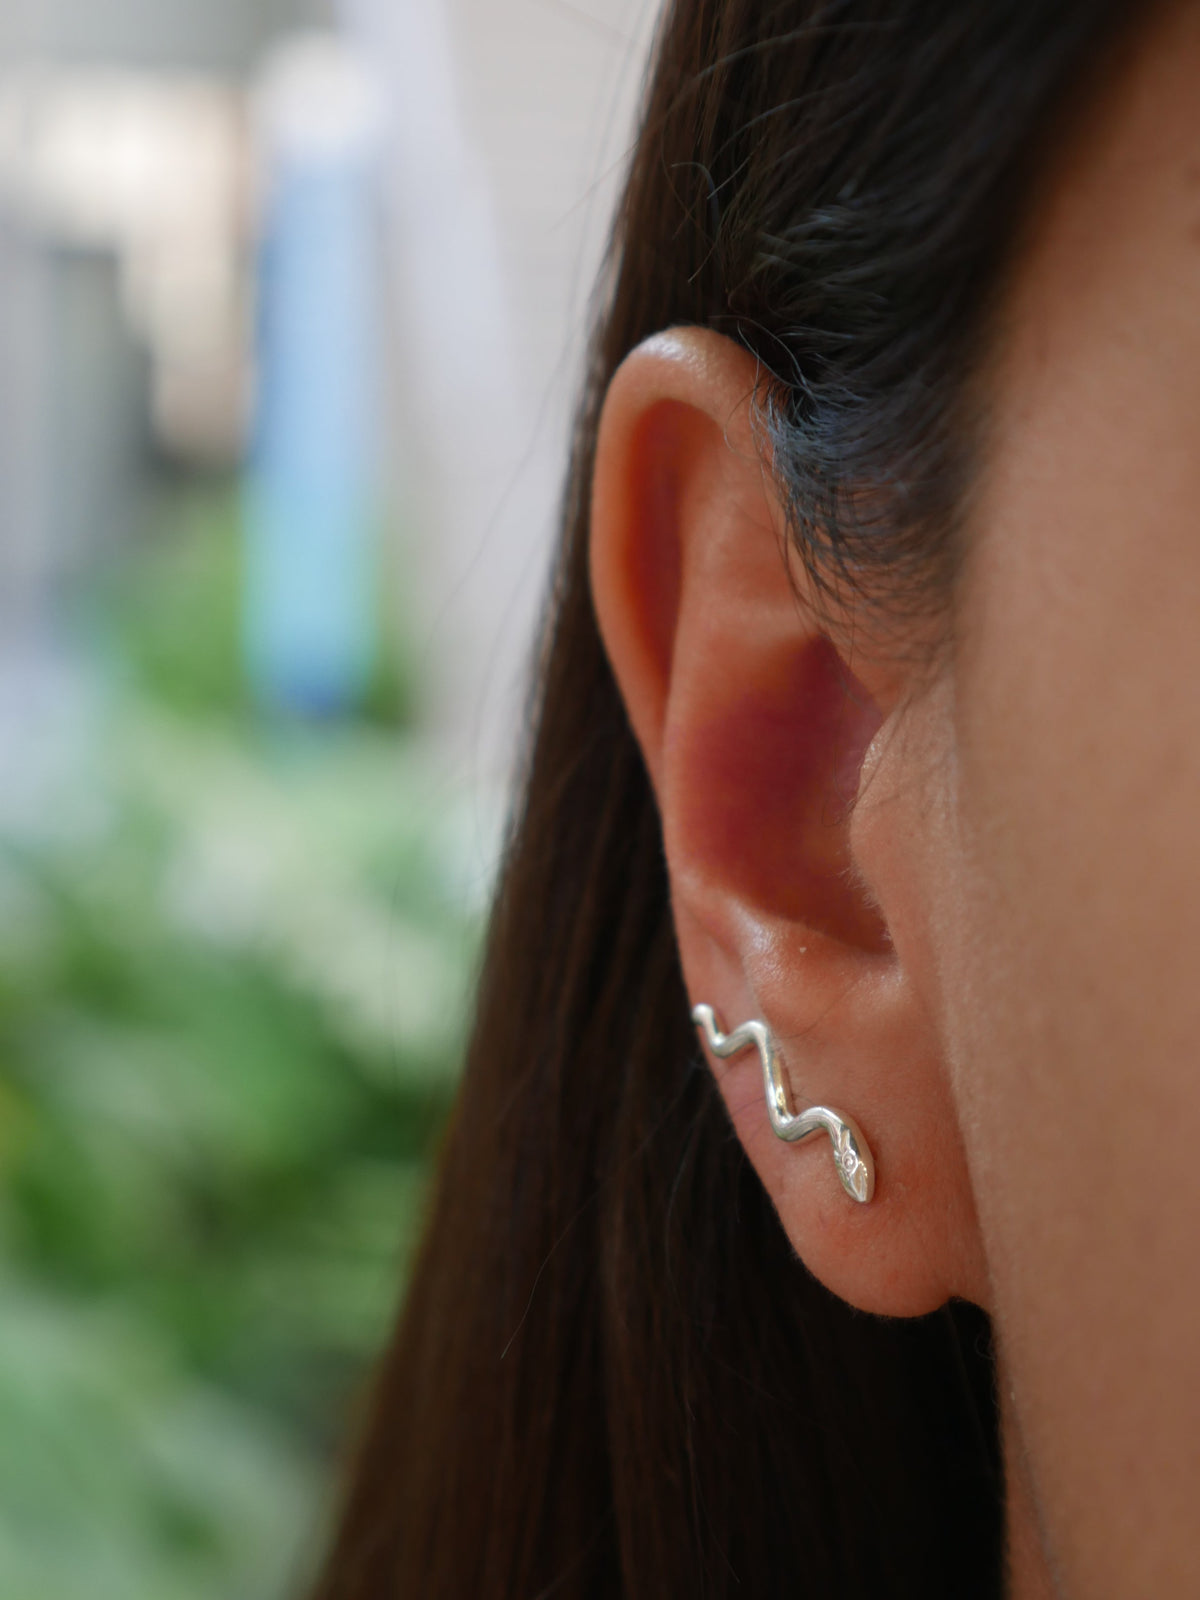 earrings, snake earrings, silver earrings, 925 sterling silver earrings, designer earrings, dainty snake earrings, ear crawler earrings, cool jewelry, trending on tiktok, jewelry, fashion jewelry, christmas gifts, birthday gifts, anniversary gifts , designer earrings, hypoallergenic earrings, cool earrings, long snake earrings , snake jewelry, tarnish free jewelry, affordable jewelry, cheap earrings, fine jewelry, silver jewelry